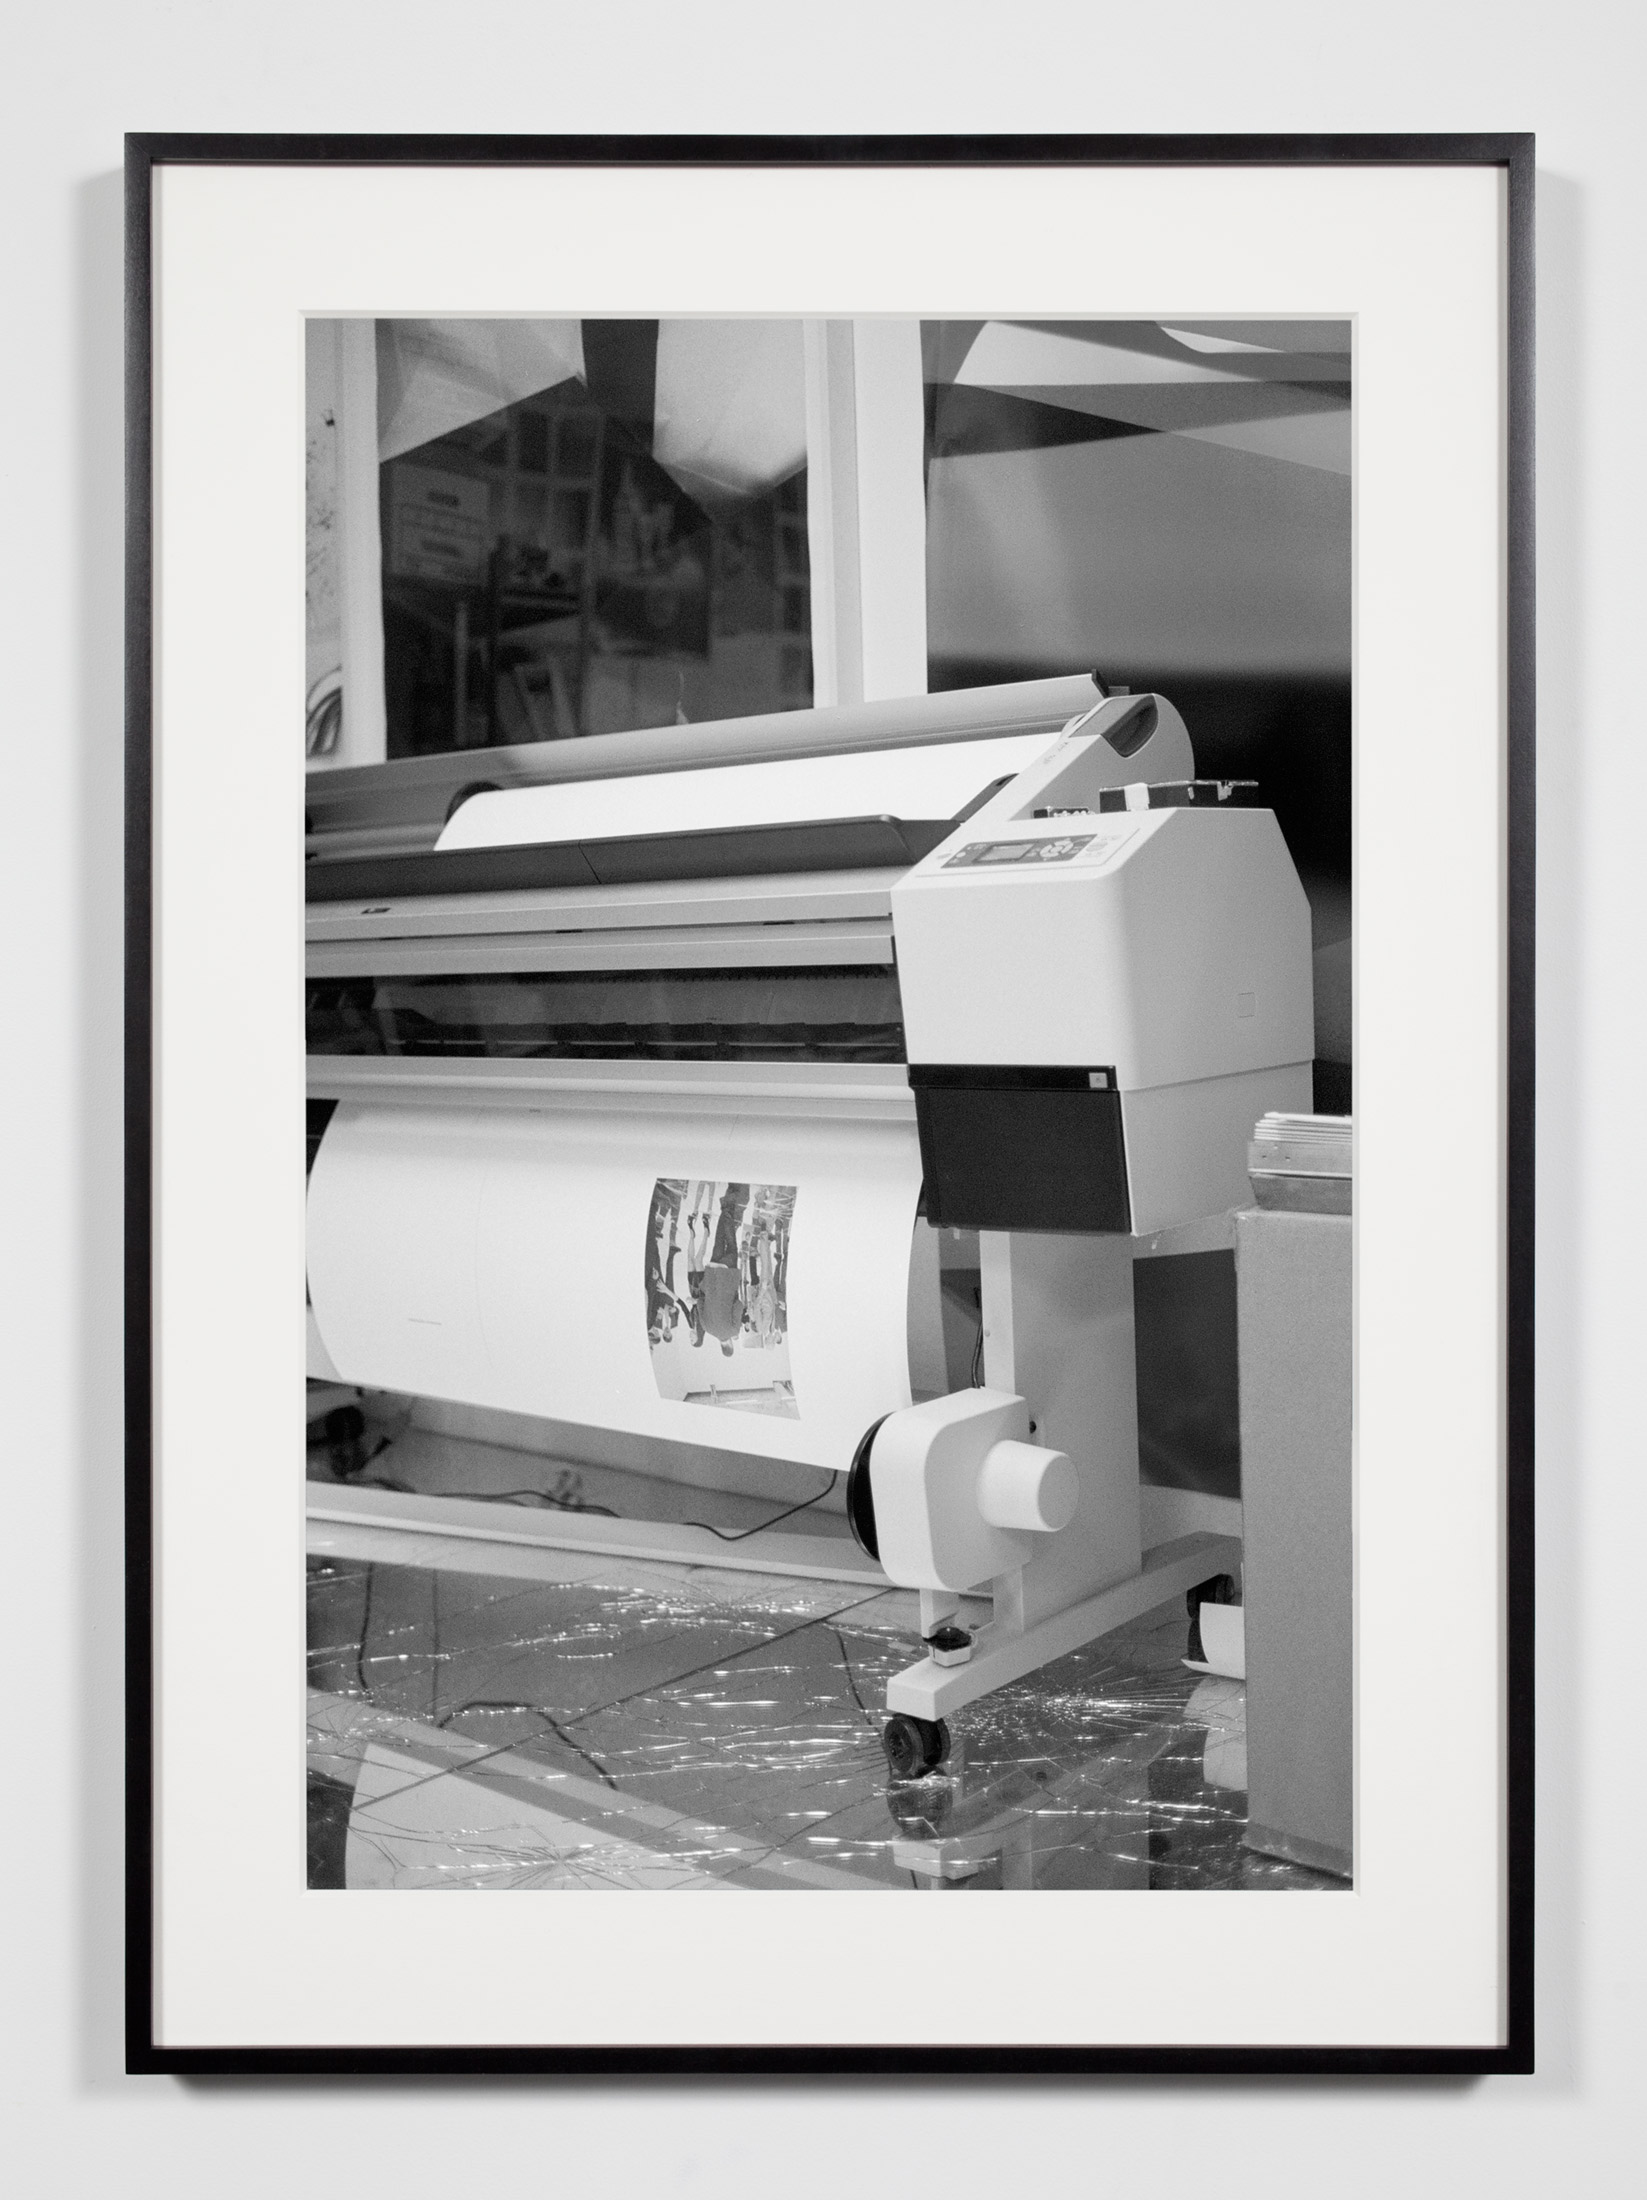   Artist Studio, Wide-Format Inkjet Printer, Los Angeles, California, December 9, 2010   2011  Epson Ultrachrome K3 archival ink jet print on Hahnemühle Photo Rag paper  36 3/8 x 26 3/8 inches   Industrial Portraits, 2008–    A Diagram of Forces, 201